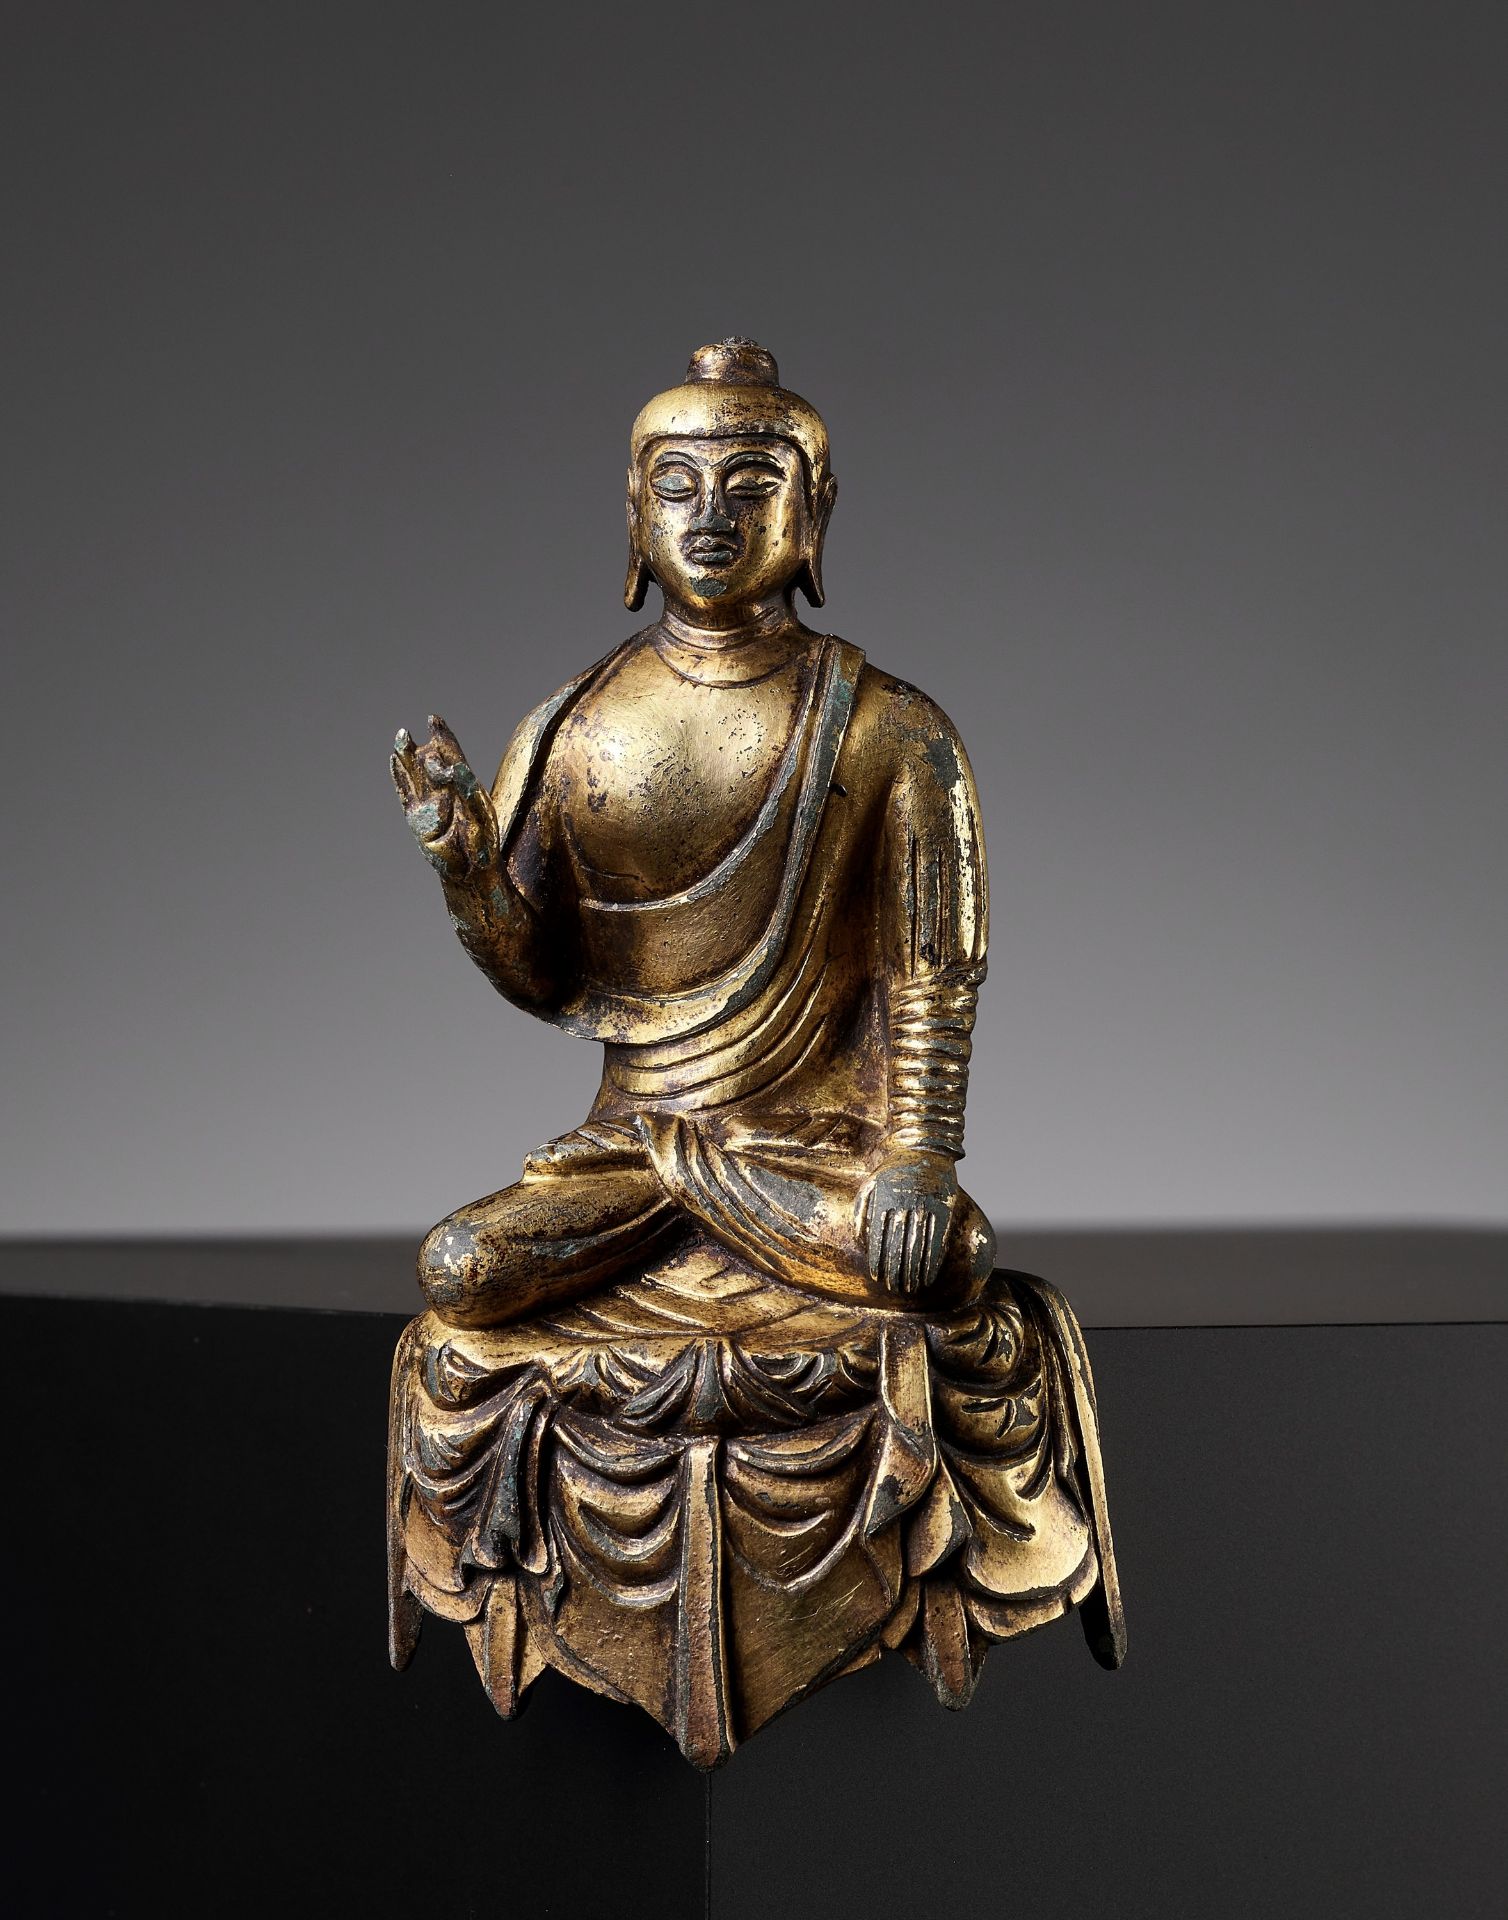 A MAGNIFICENT AND RARE GILT-BRONZE FIGURE OF BUDDHA, TANG DYNASTY